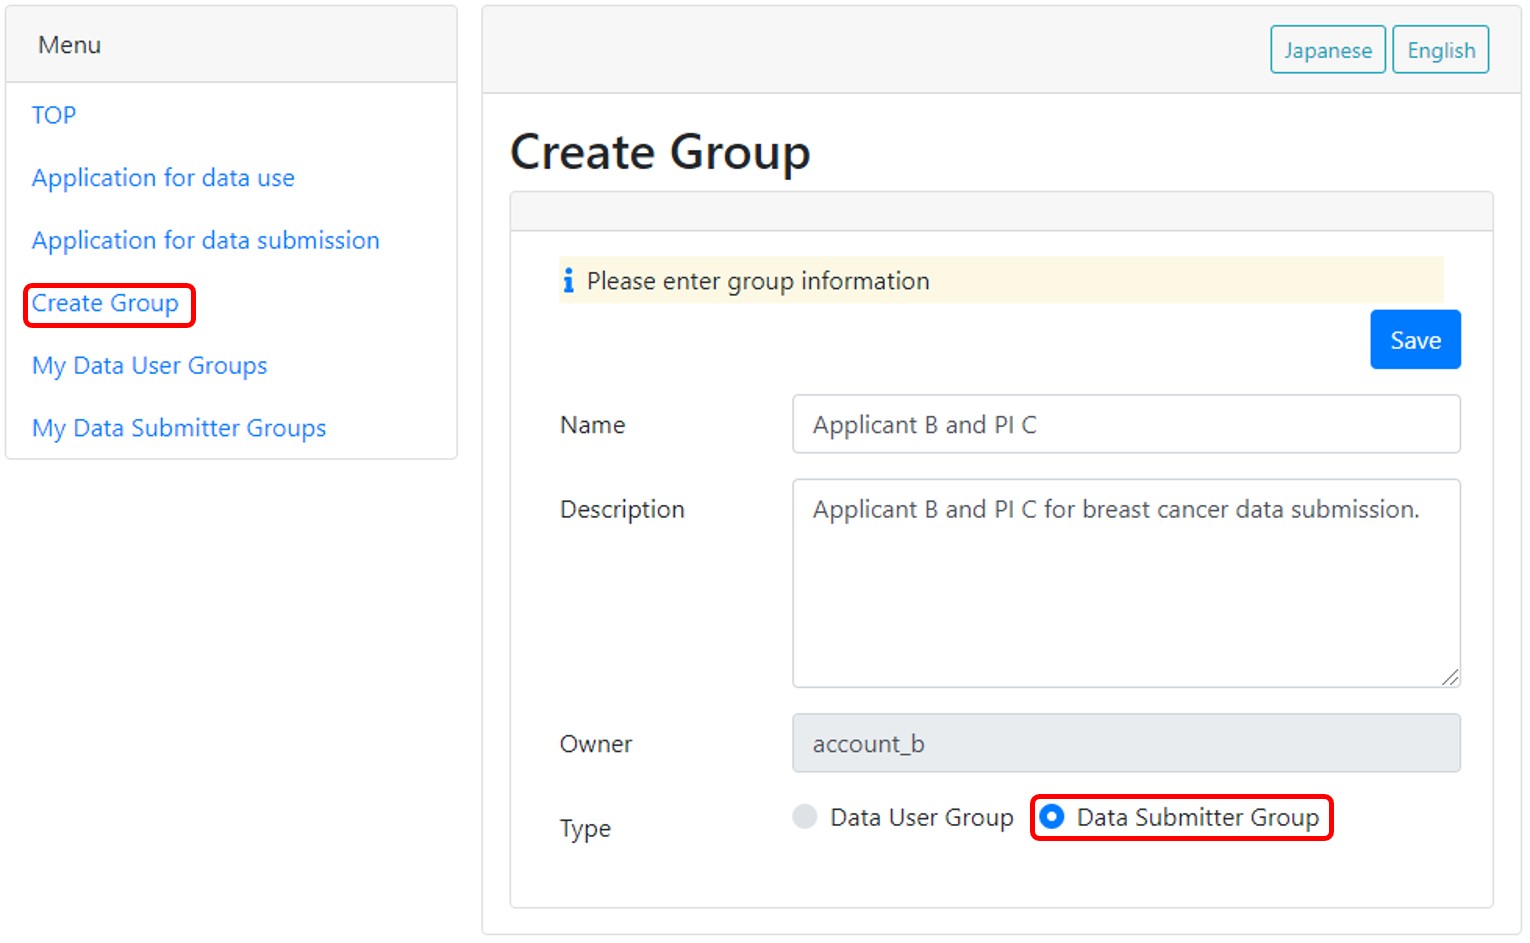 Create a data submitter group